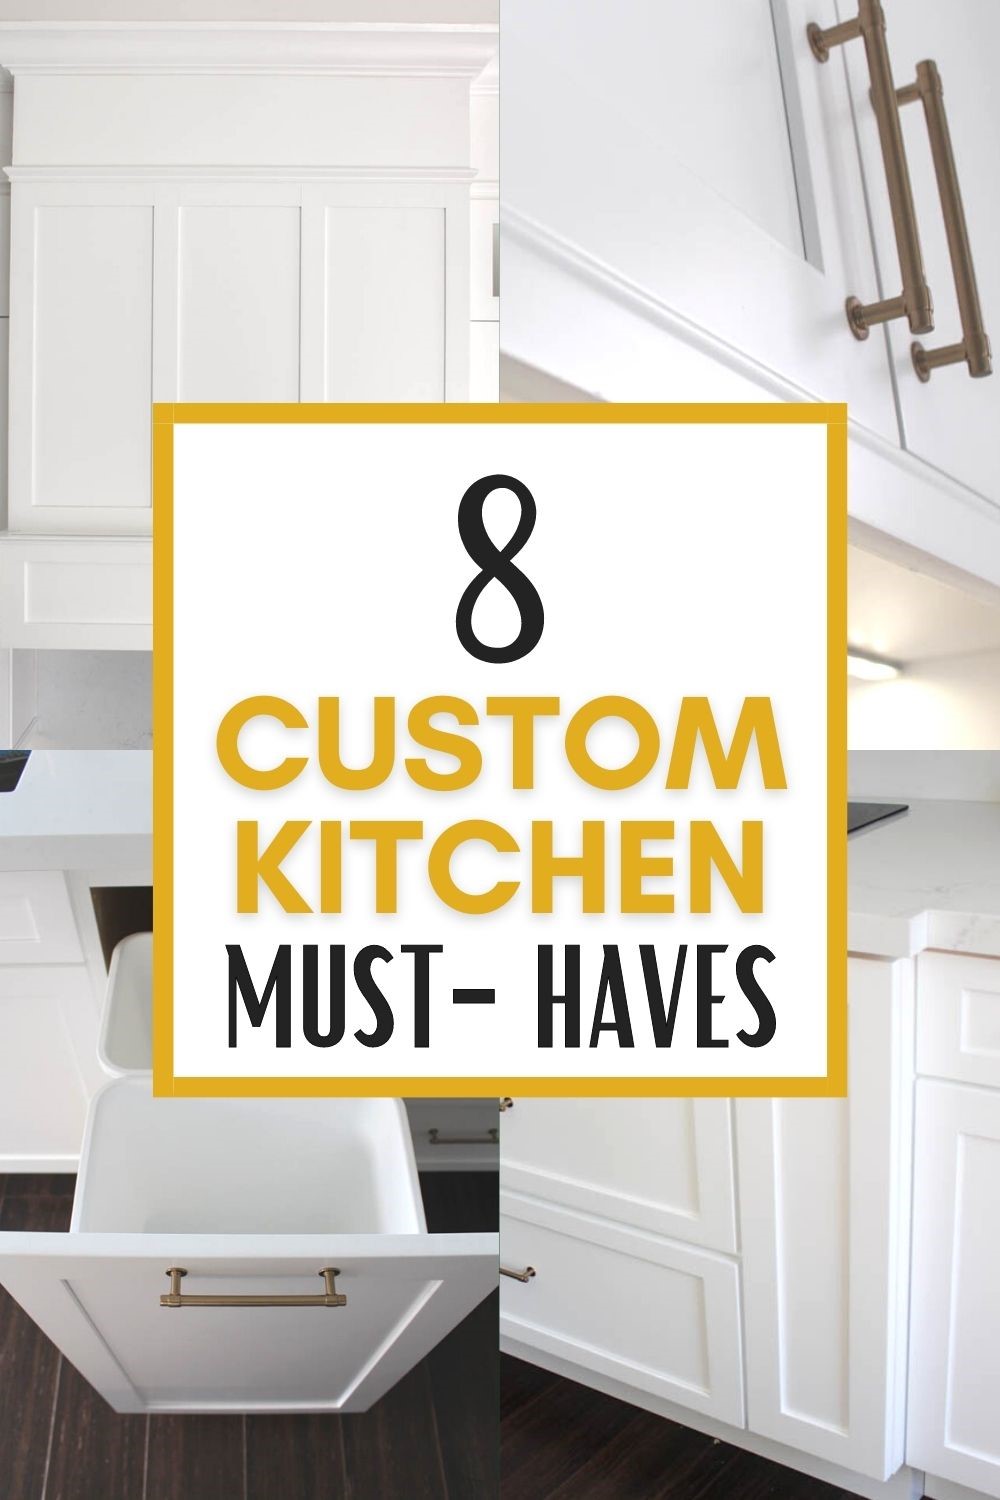 https://simplylovelyliving.com/wp-content/uploads/2022/07/8-CUSTOM-KITCHEN-MUST-HAVES-THAT-ARE-ESSENTIAL.jpg